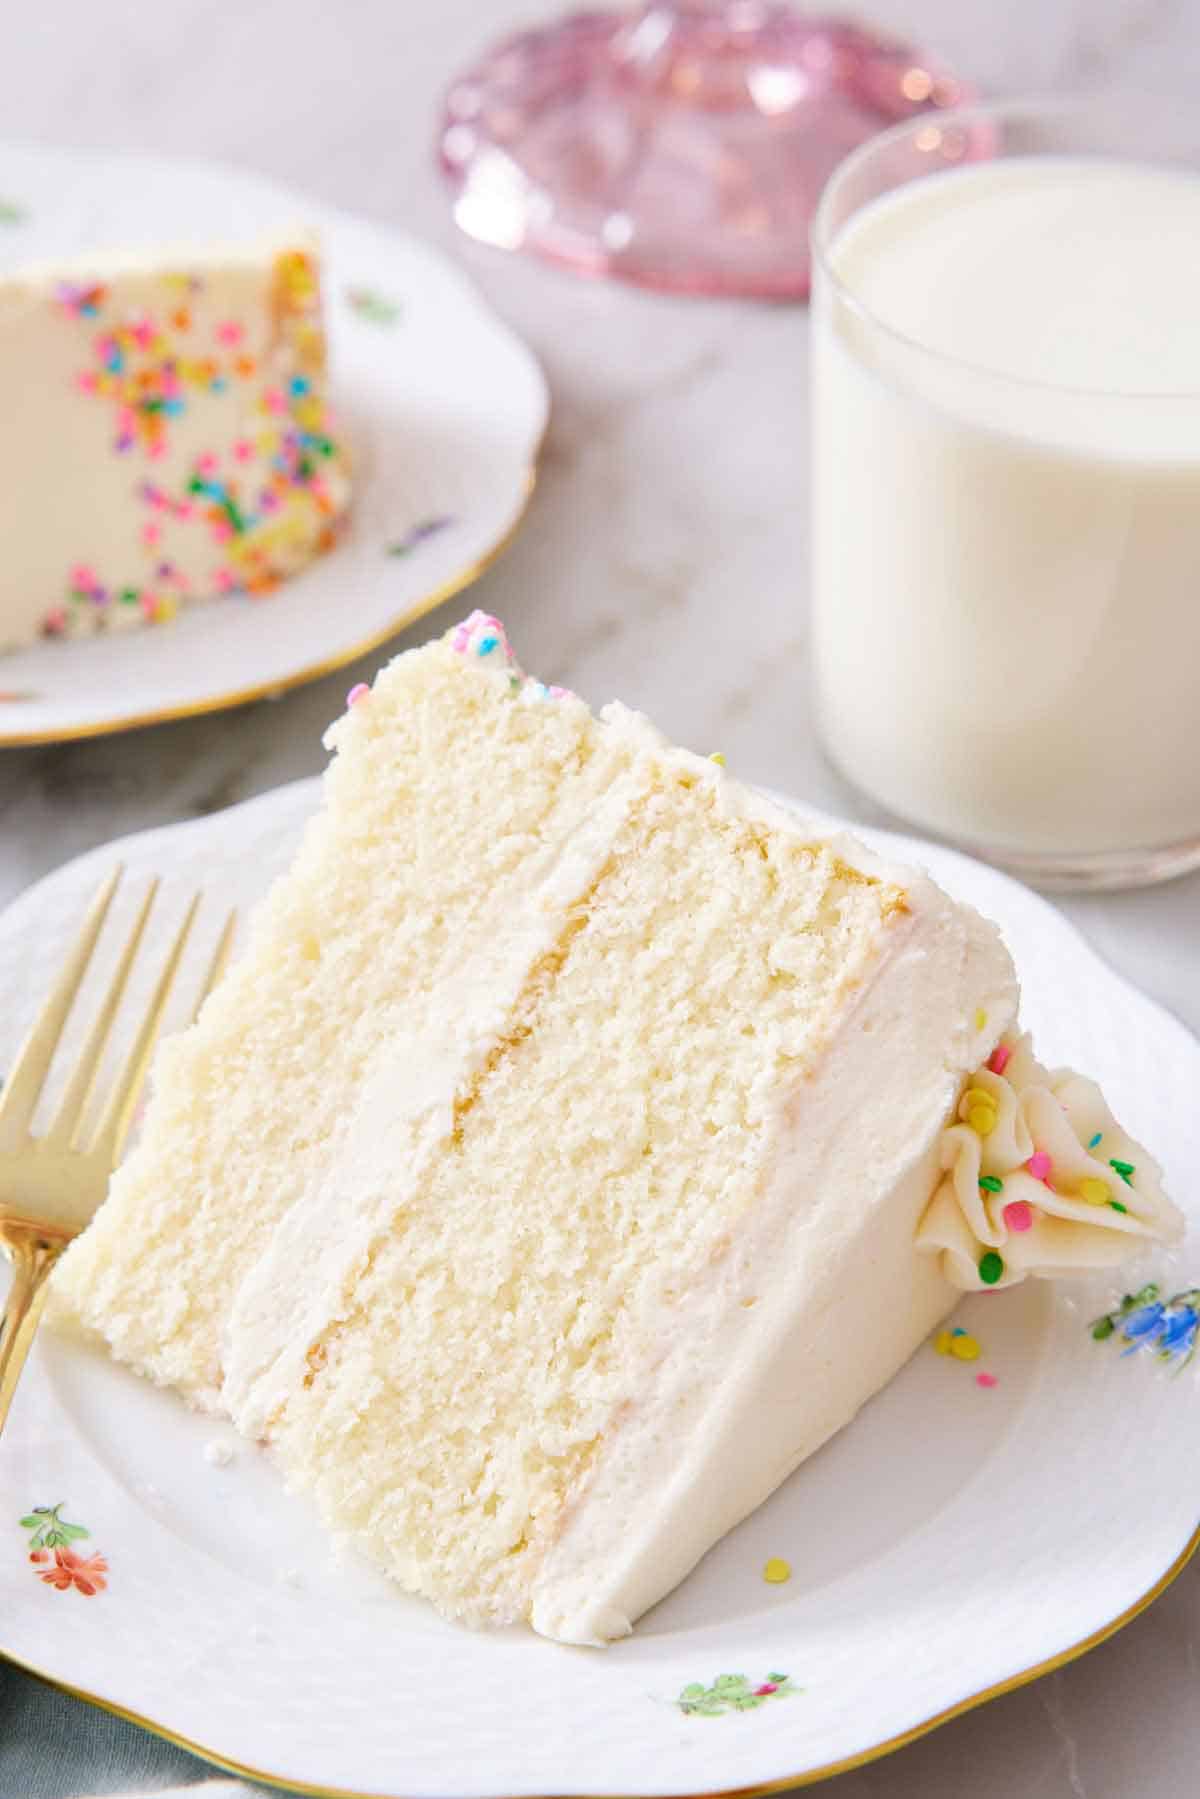 A slice of white cake lying on its side on a plate, showing the two layers with frosting in between. Glass of milk in the background.